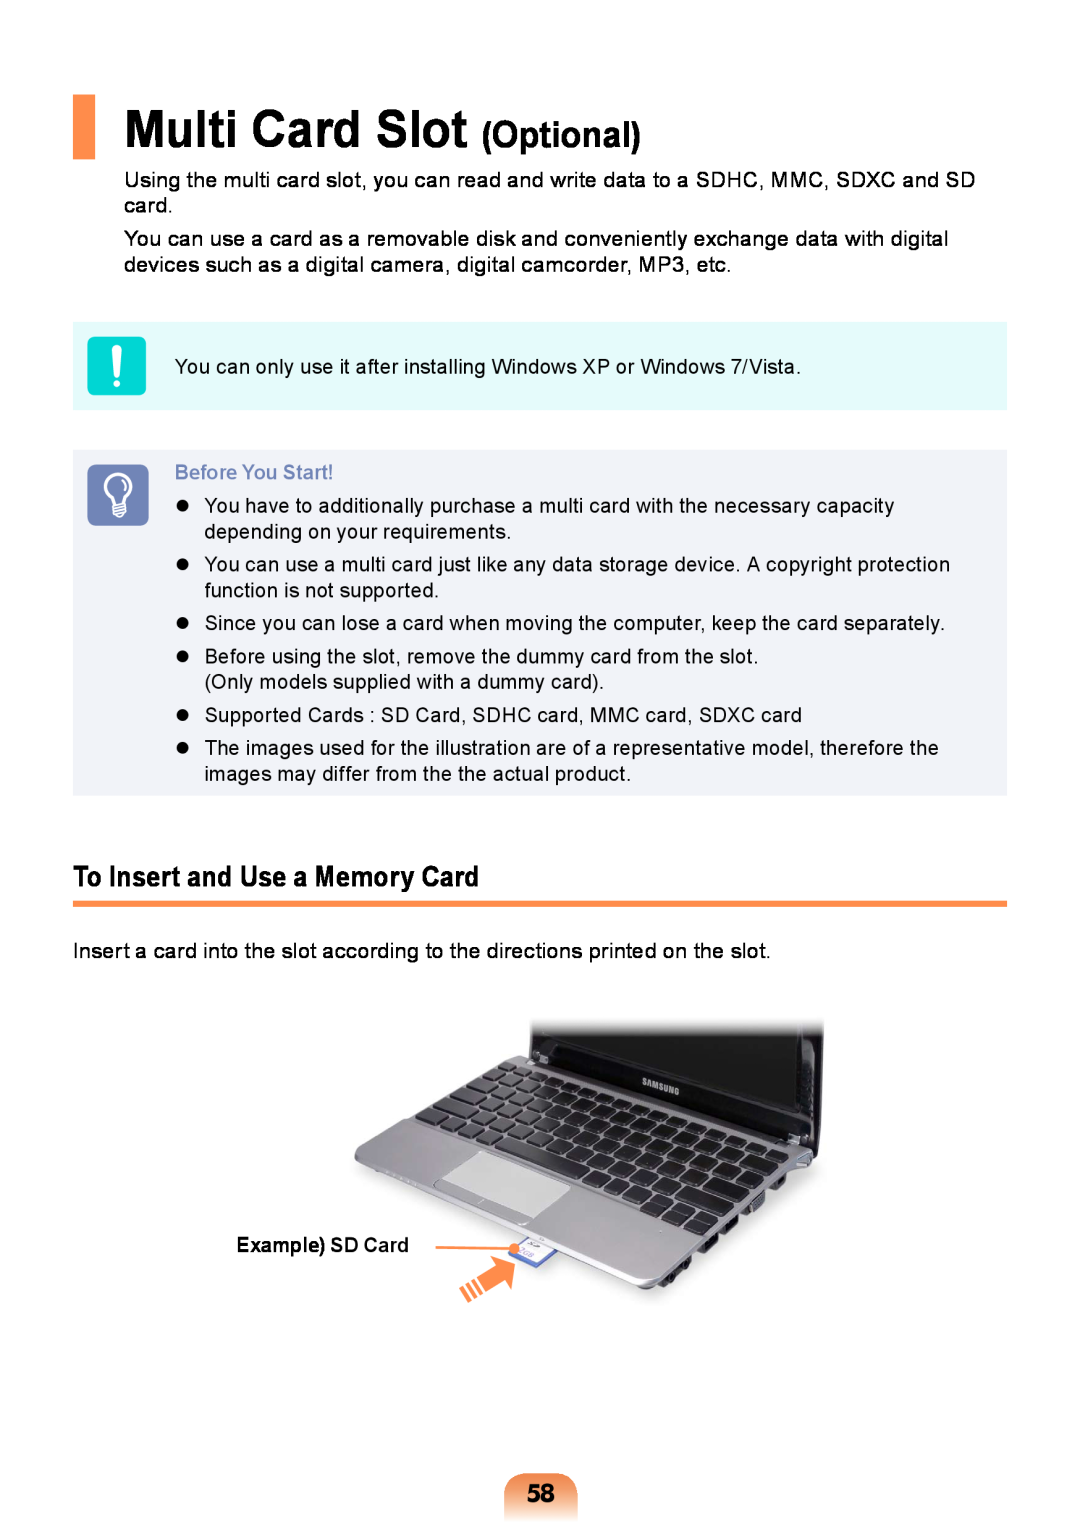 Samsung NP-RV408-A01VN manual Multi Card Slot Optional, To Insert and Use a Memory Card, Before You Start, Example SD Card 